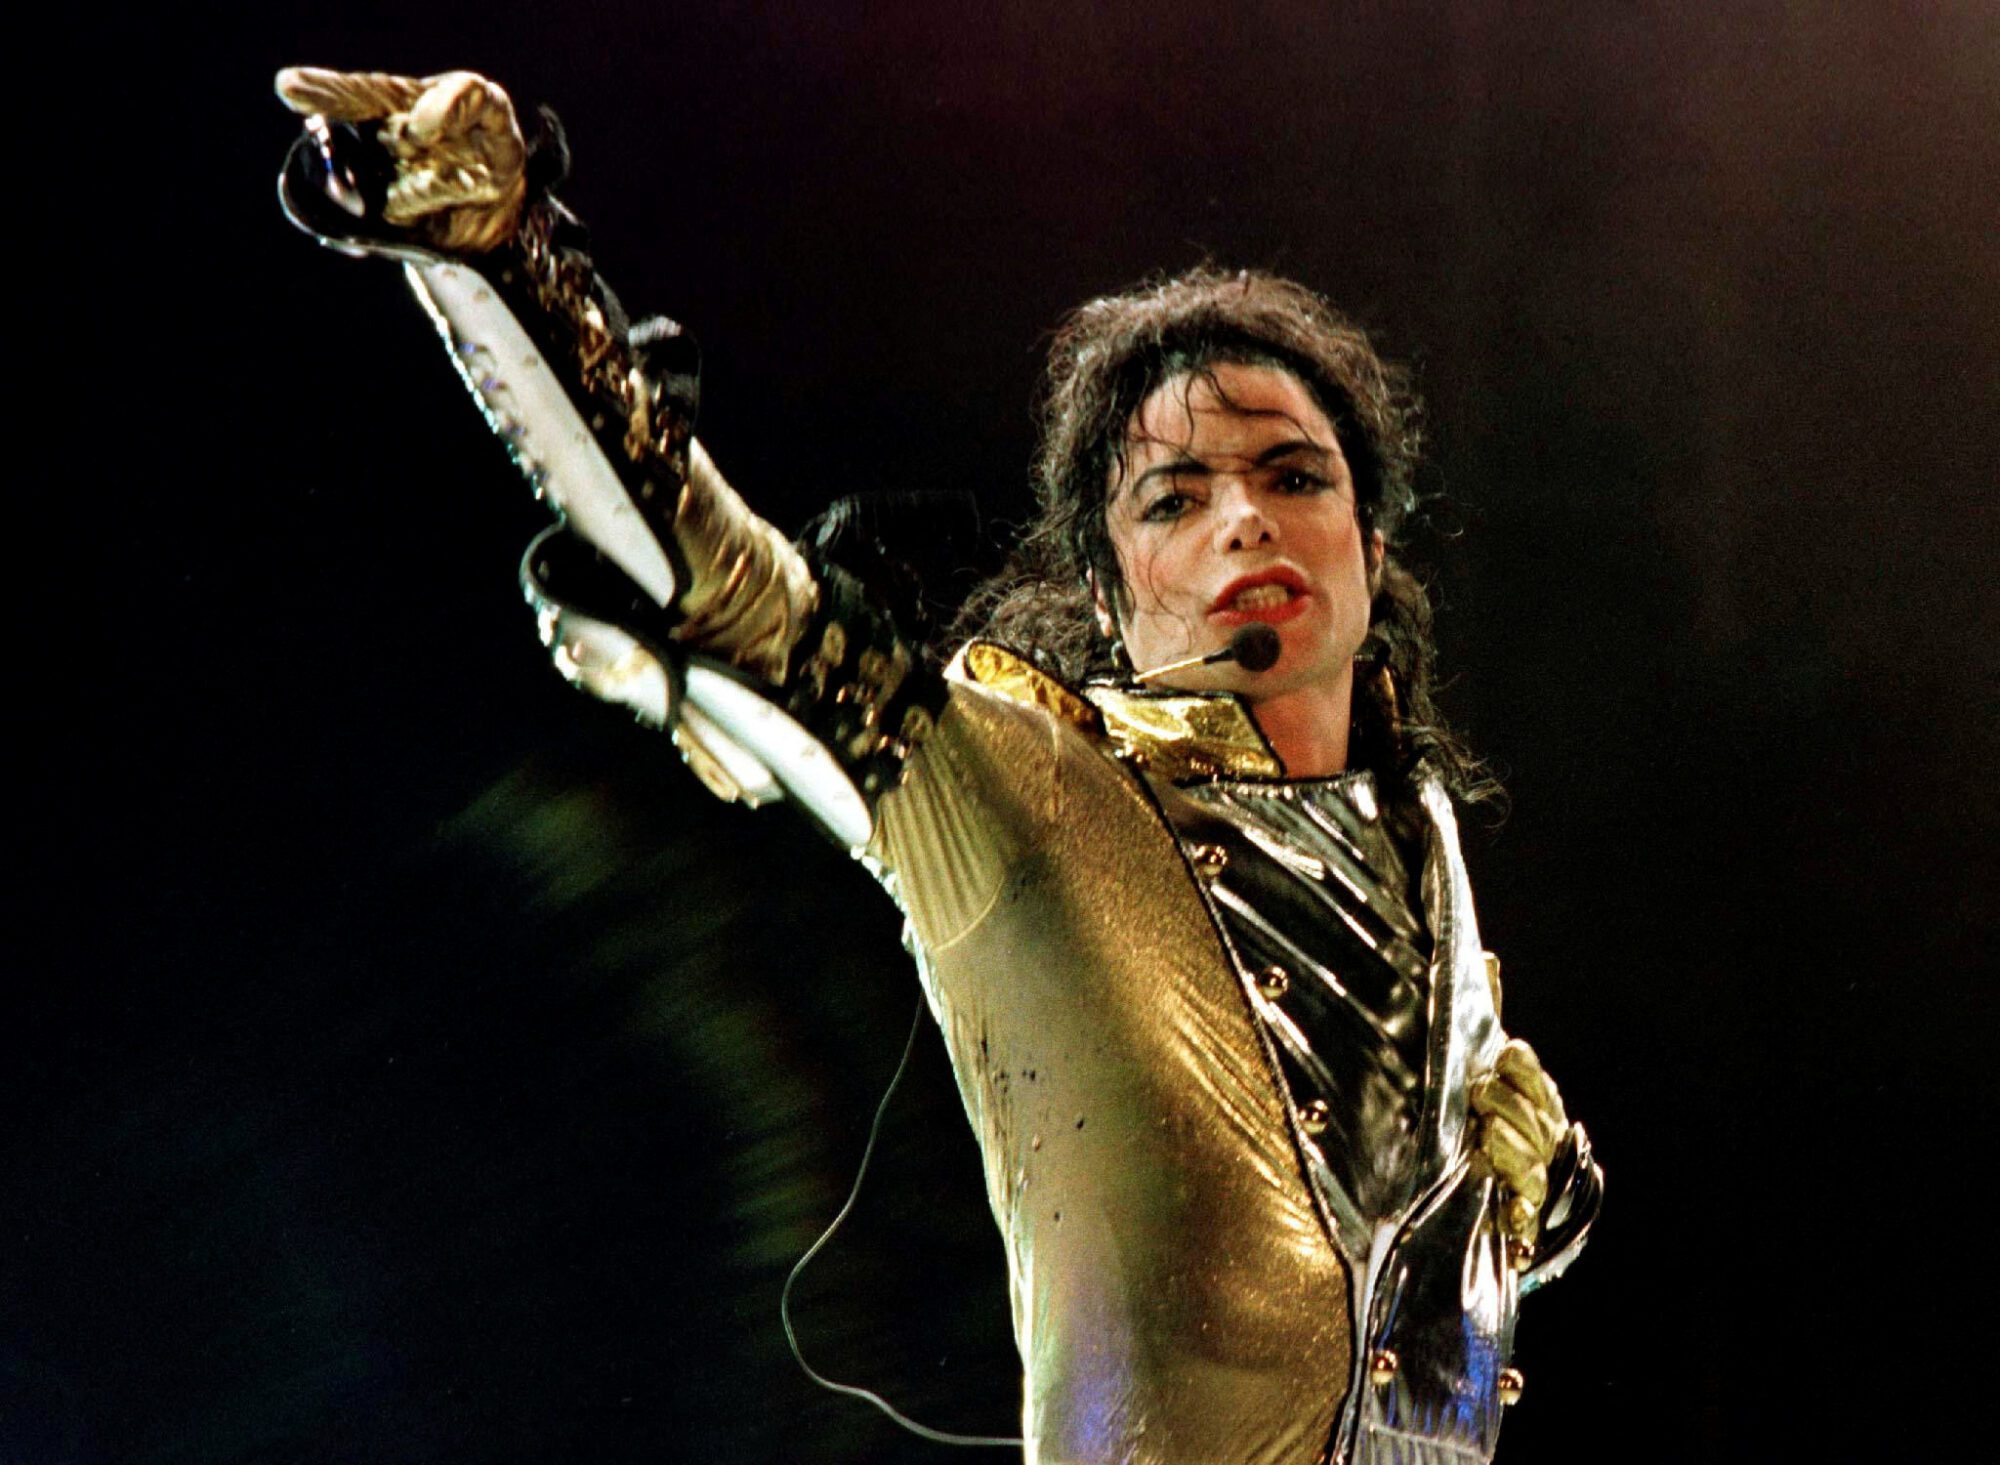 U.S. pop star Michael Jackson performs during his "HIStory World Tour" concert in Vienna, July 2, 1997. REUTERS/Leonhard Foeger